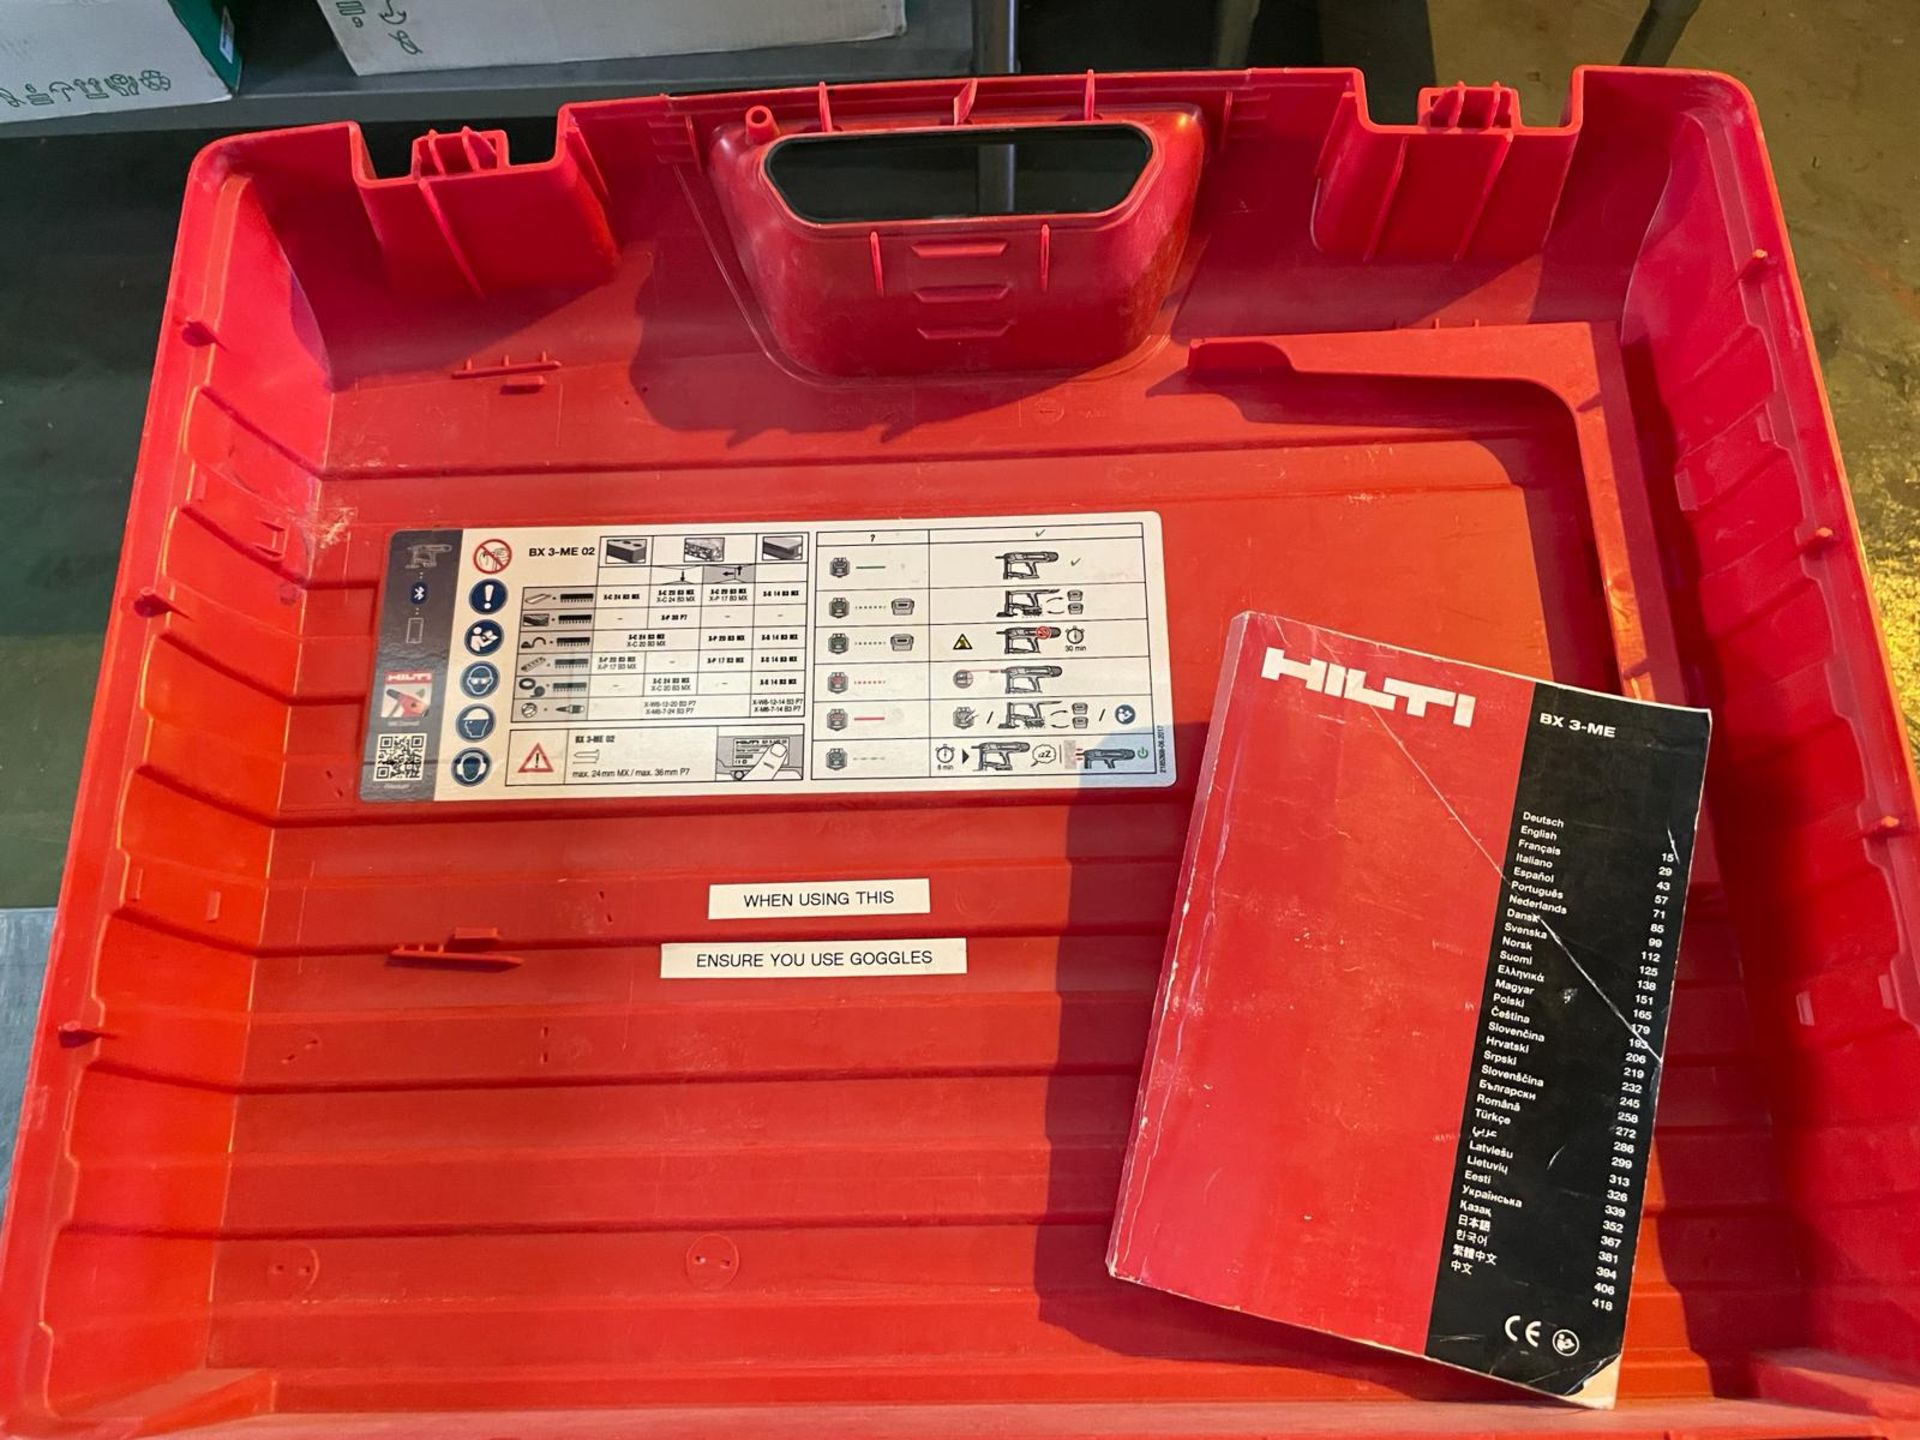 1 x Hilti BX3 Cordless Nail Gun Fastening Tool - Includes Case, Battery and Charger - RRP £3,400 - Image 5 of 7